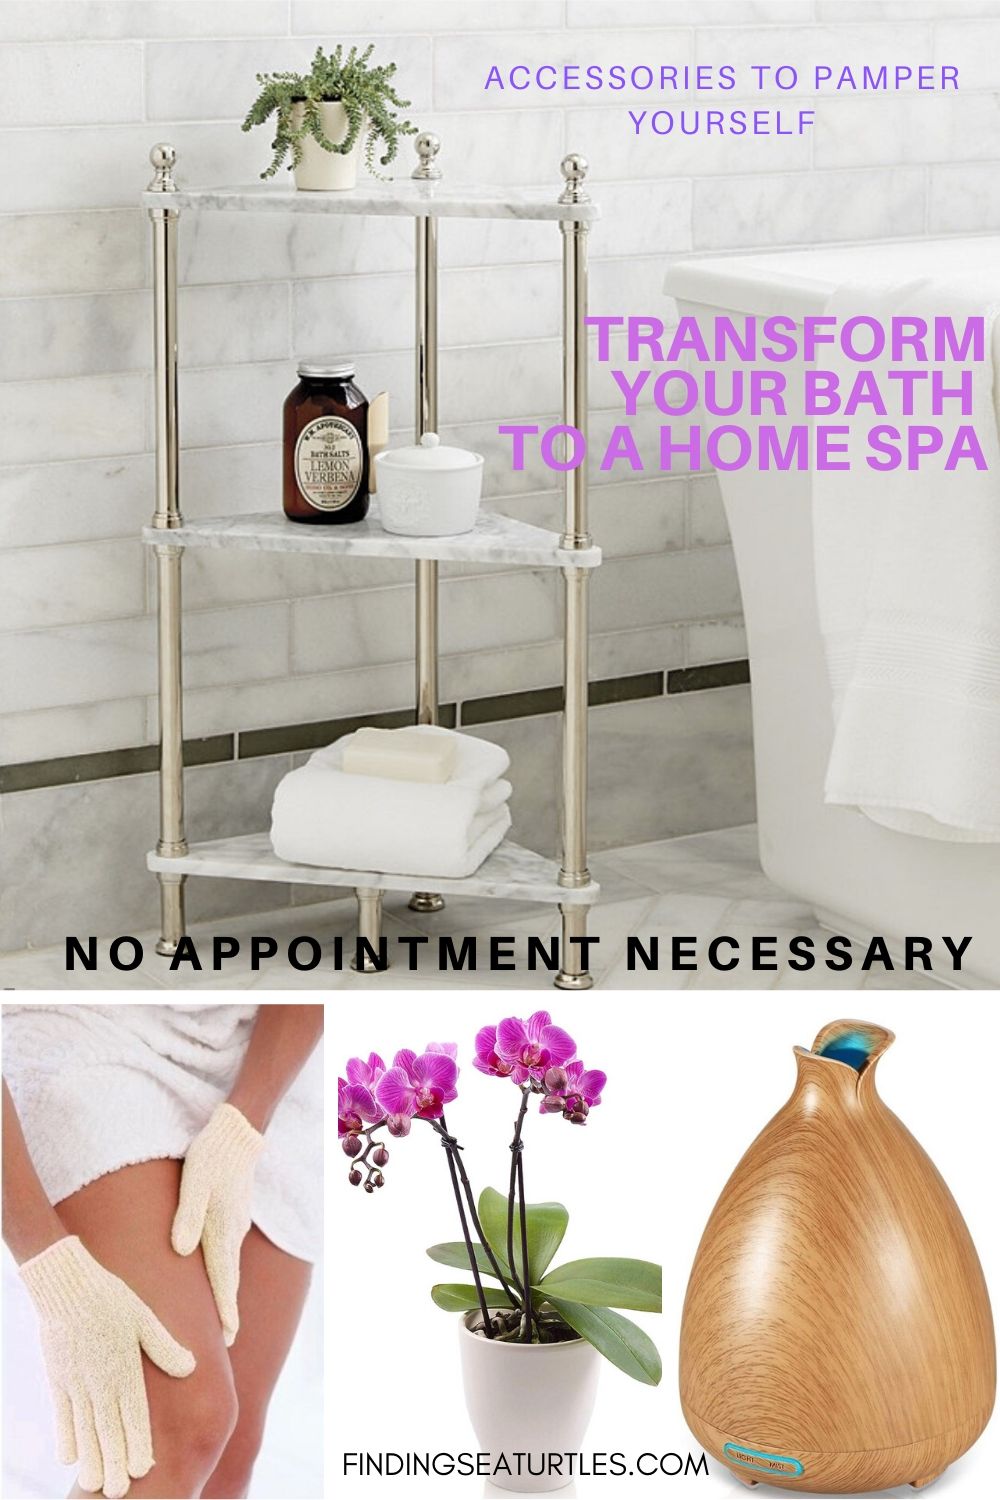 Accessories to Pamper Yourself Transform your Bath to a Home Spa #Spa #bathroom #HomeSpa #PamperYourself #SpaAccessories #MeTime #BathSpa #DIYHomeSpa #Relax #Soothing